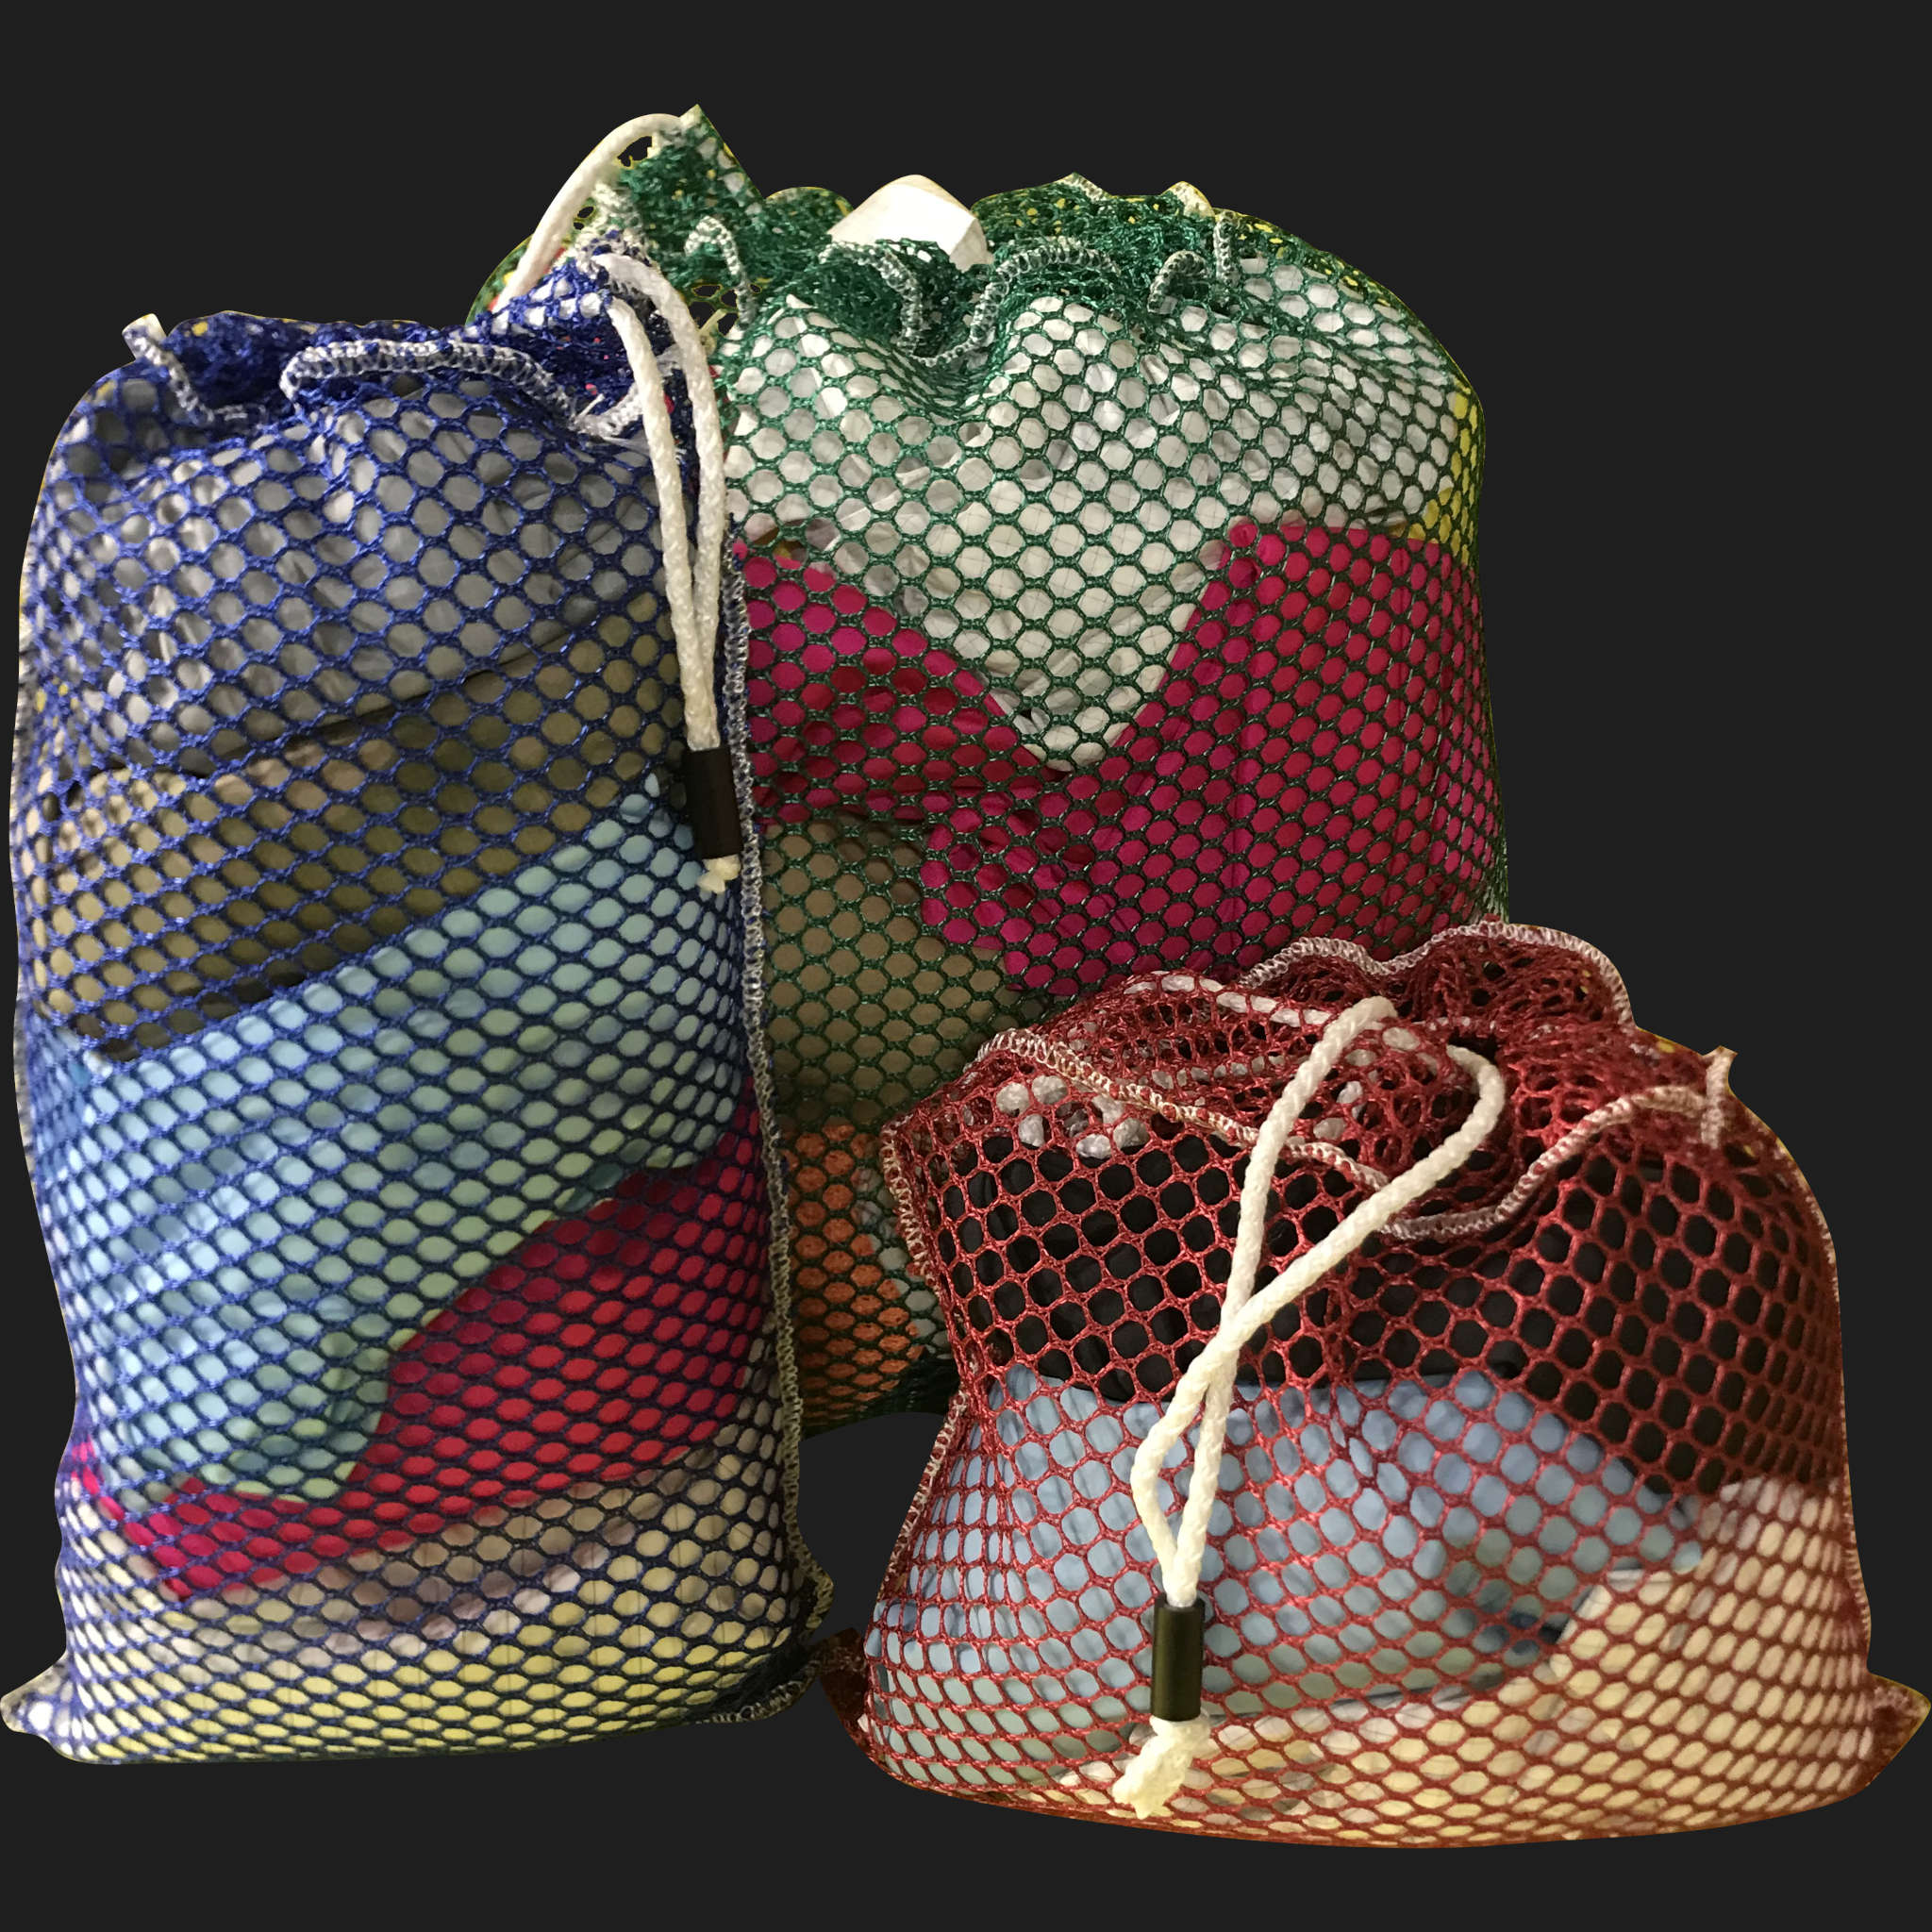 28" x 44" Customized Mesh-Net-Laundry Bags Heavy Duty with Cord and barrellock closure